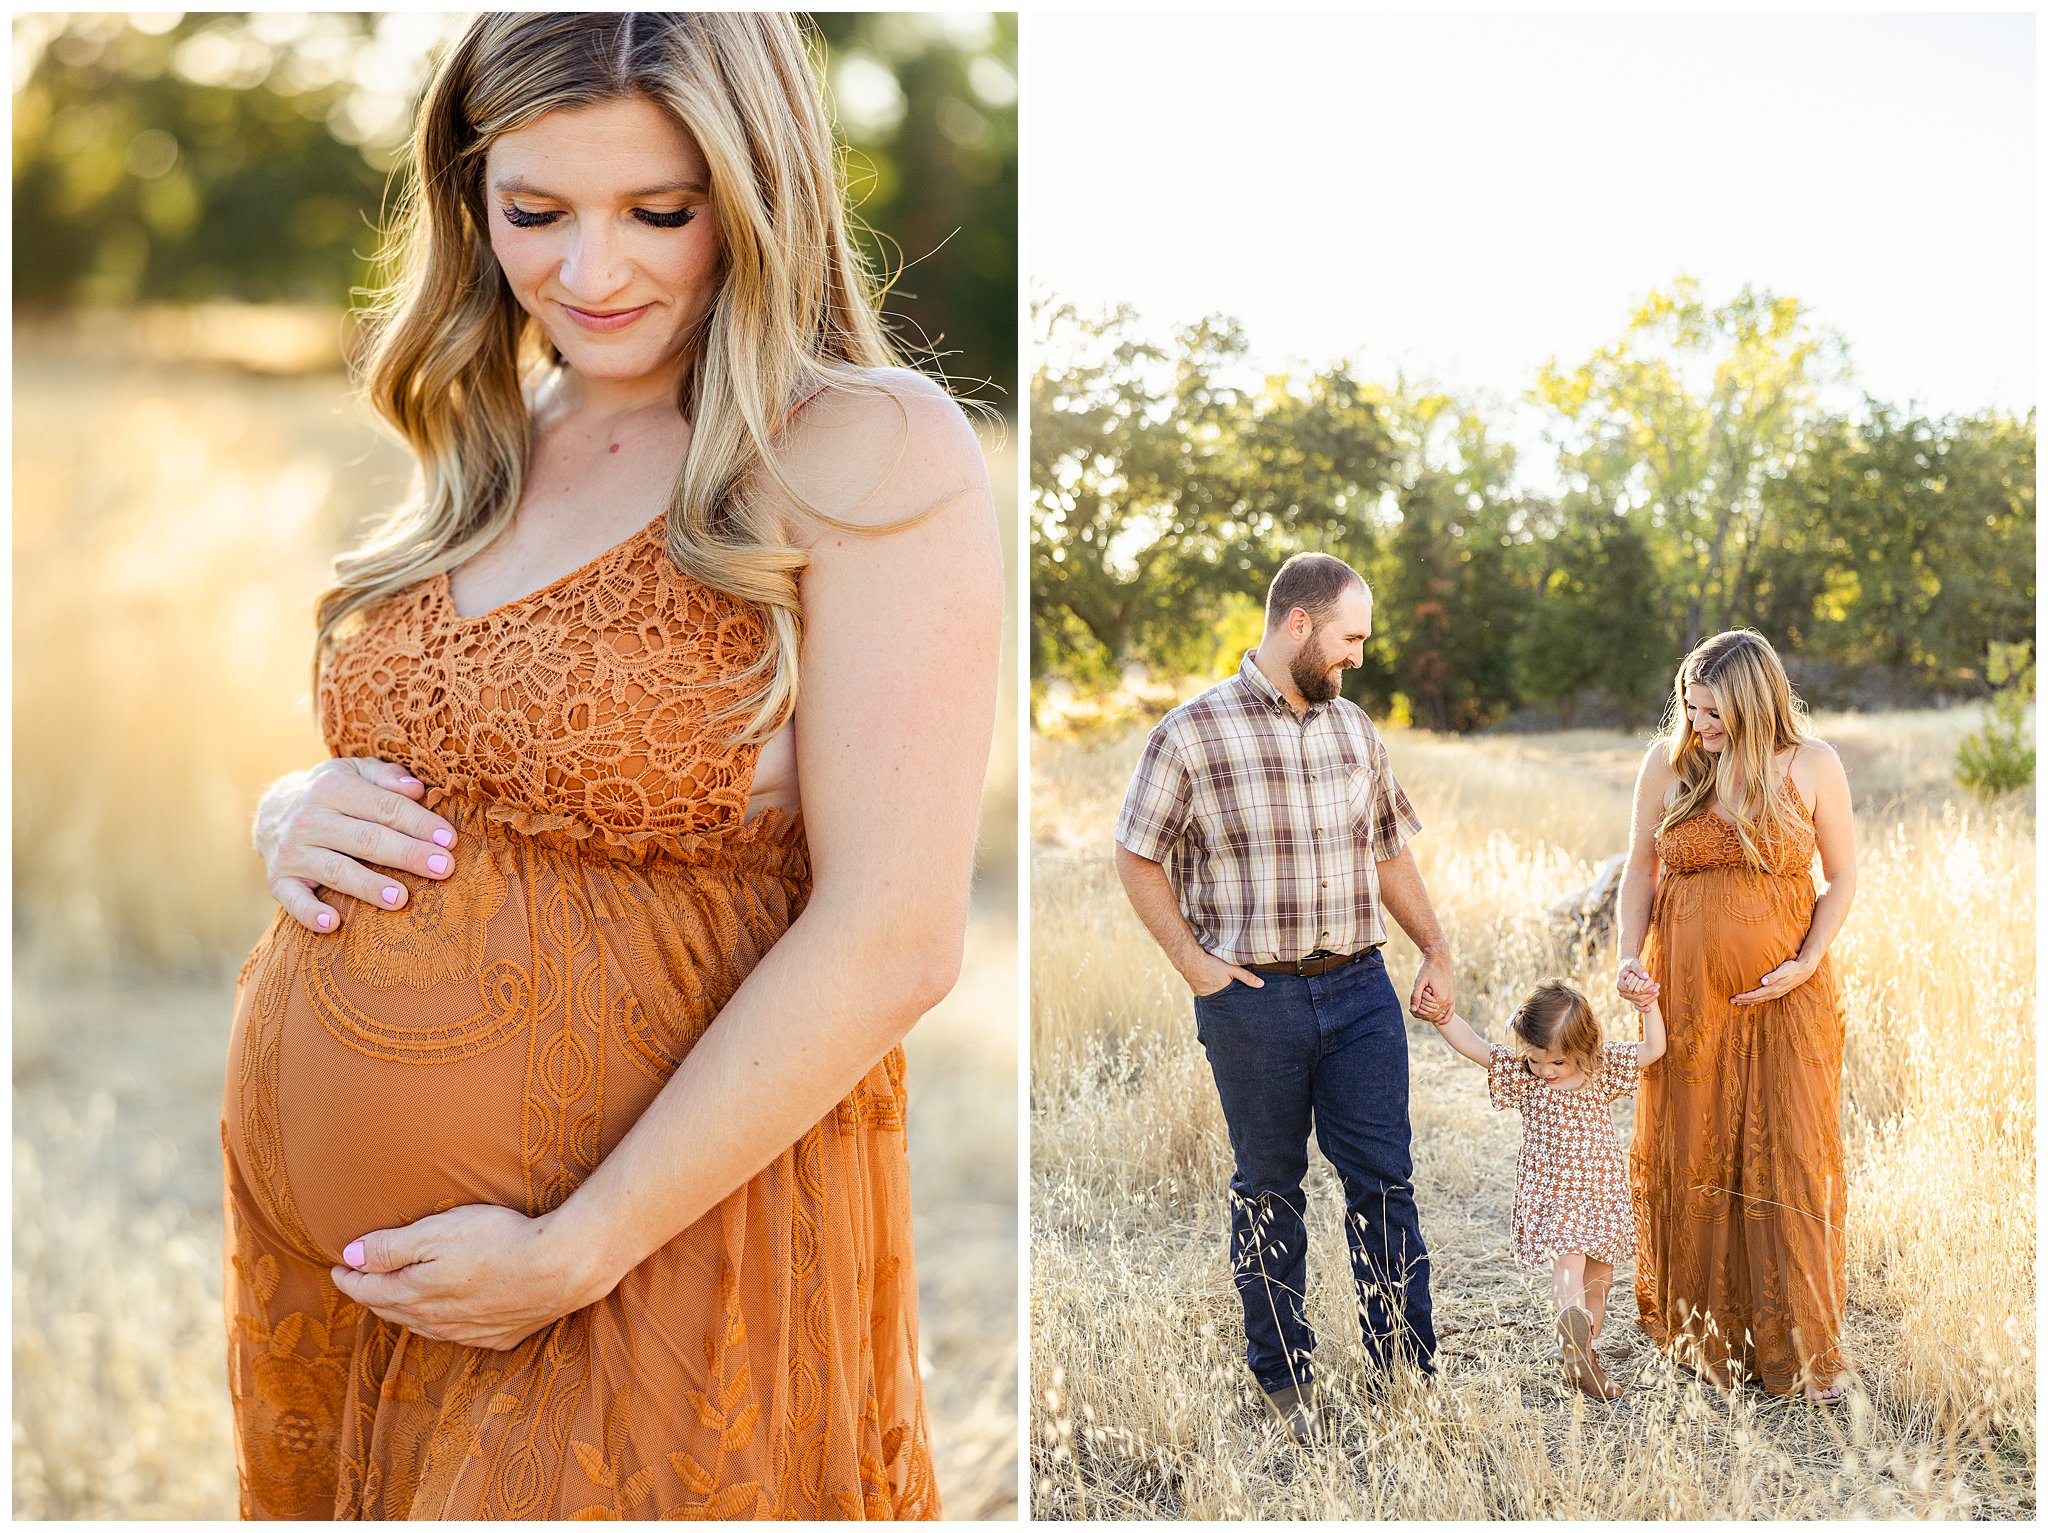 Grass Field Maternity Session Chico CA Fall Late August Summer,